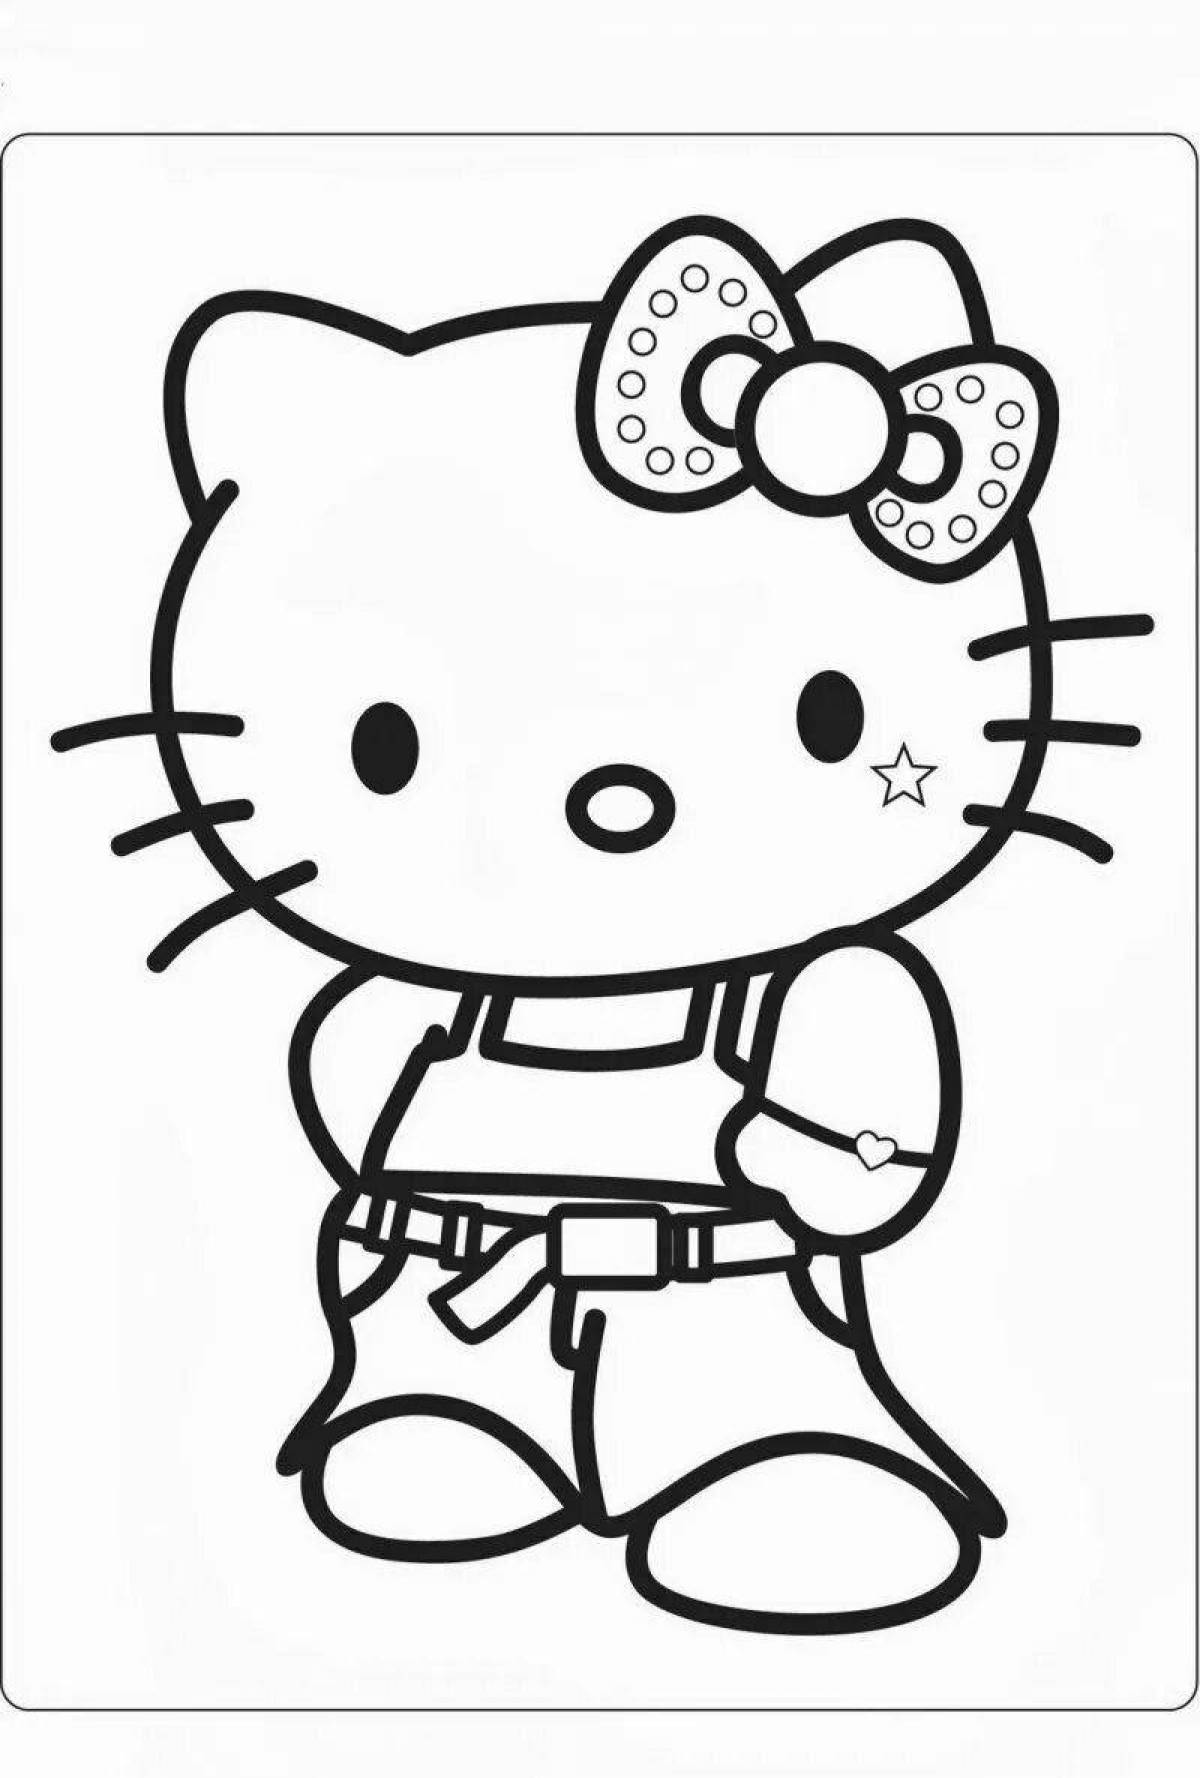 Charming hello kitty coloring book